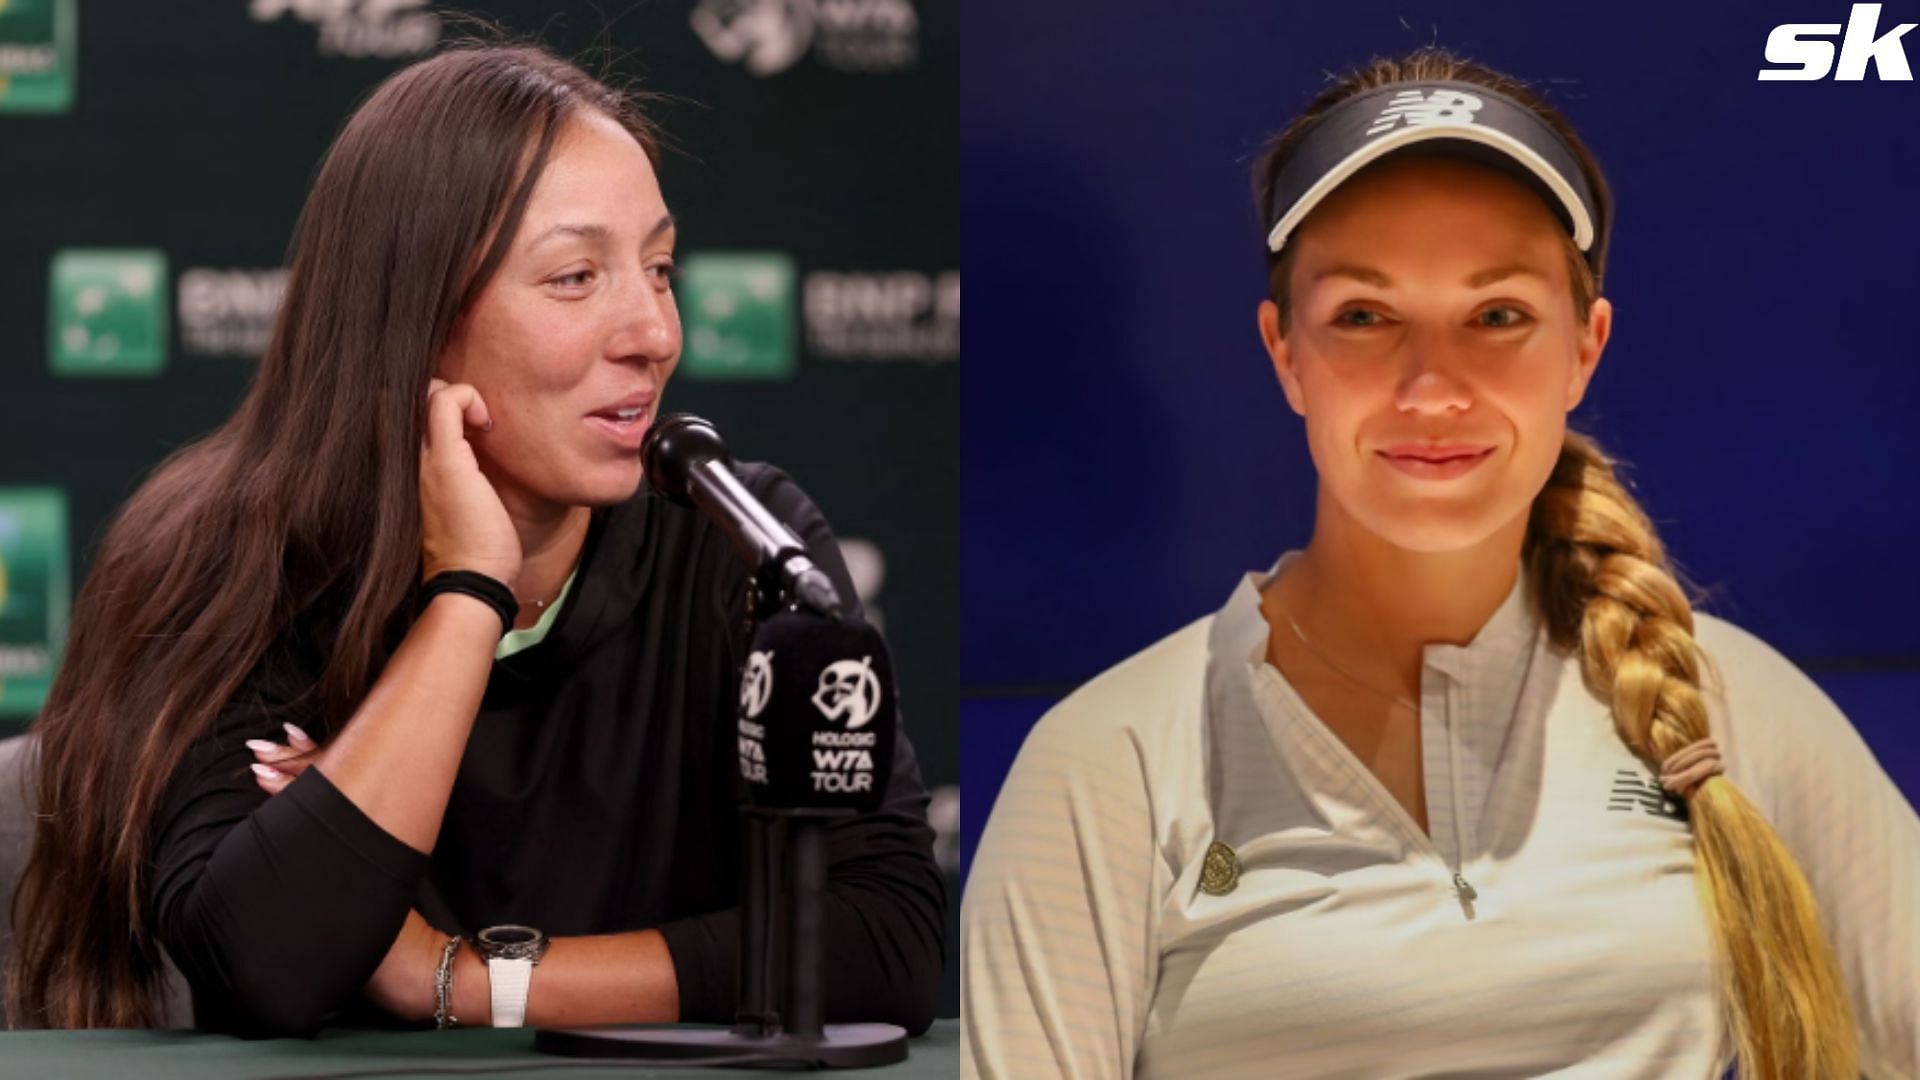 American tennis players Jessica Pegula and Danielle Collins 